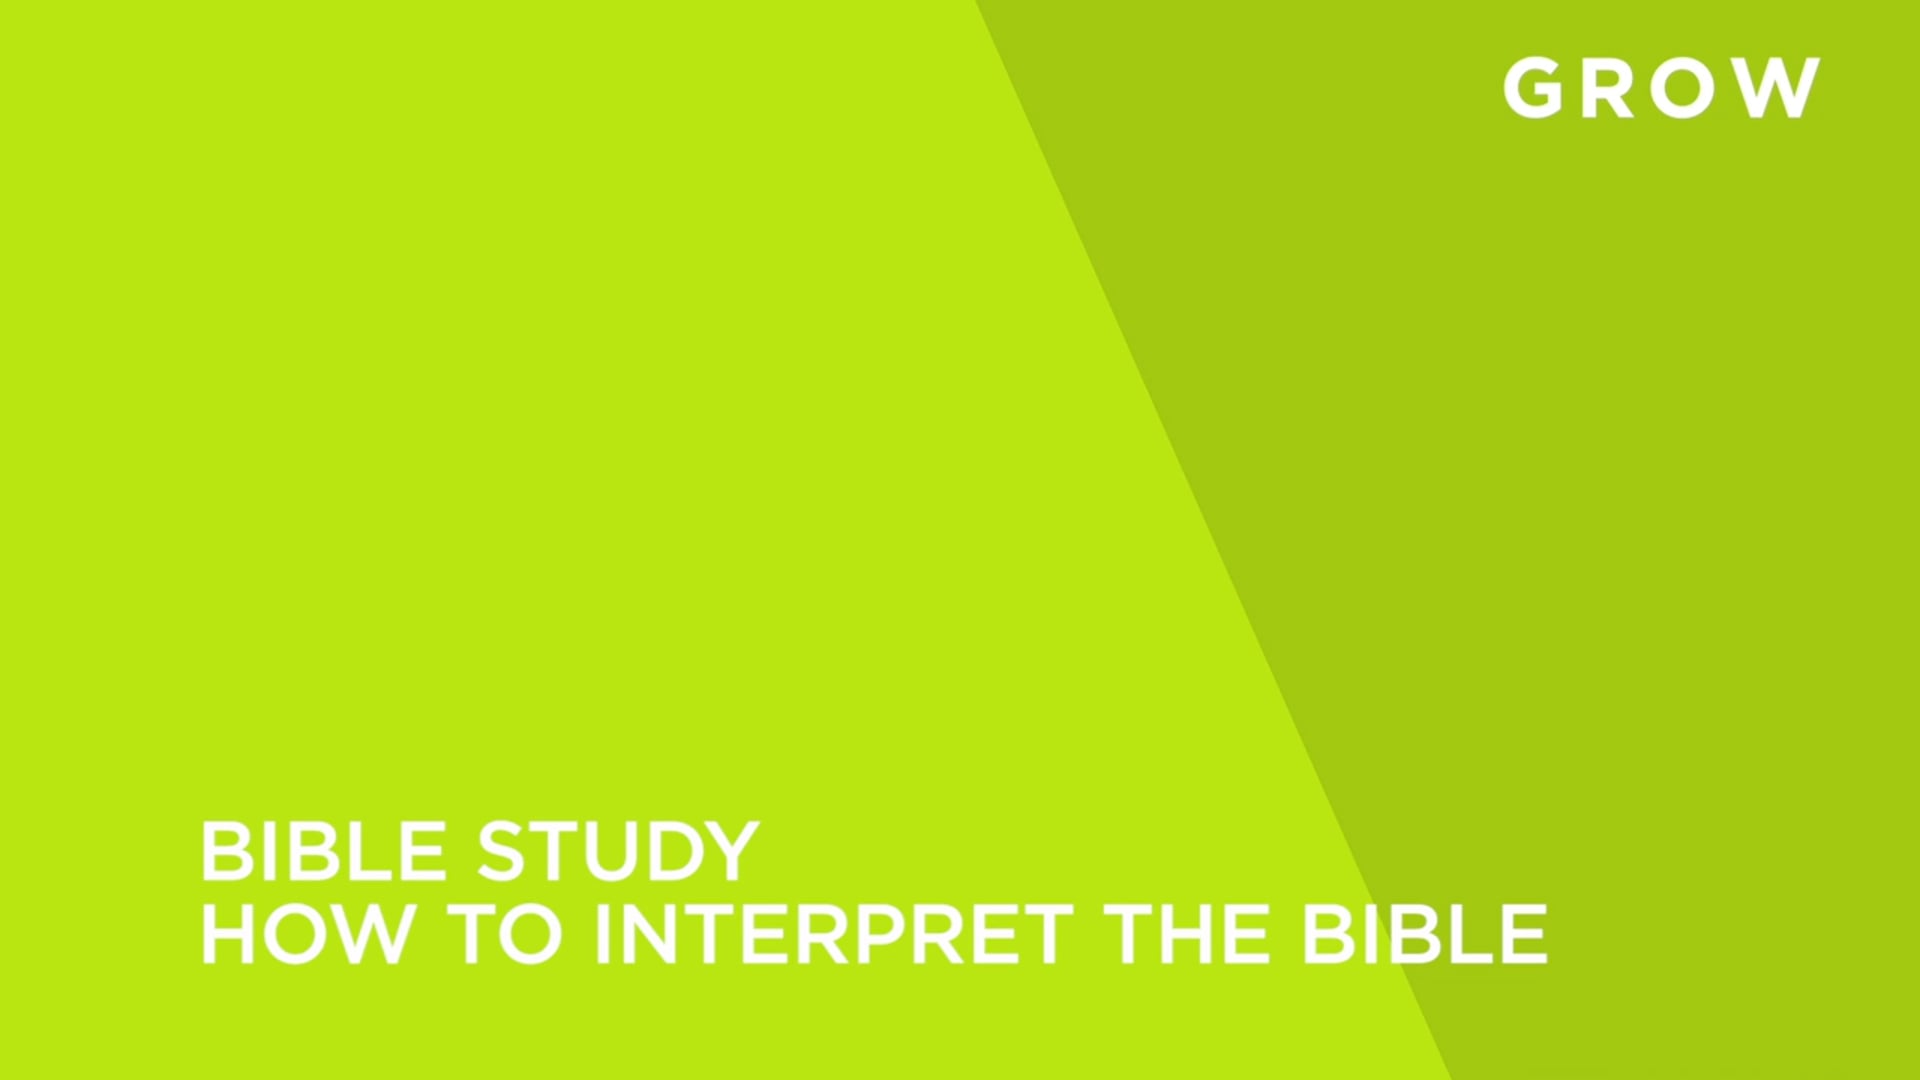 How To Interpret the Bible